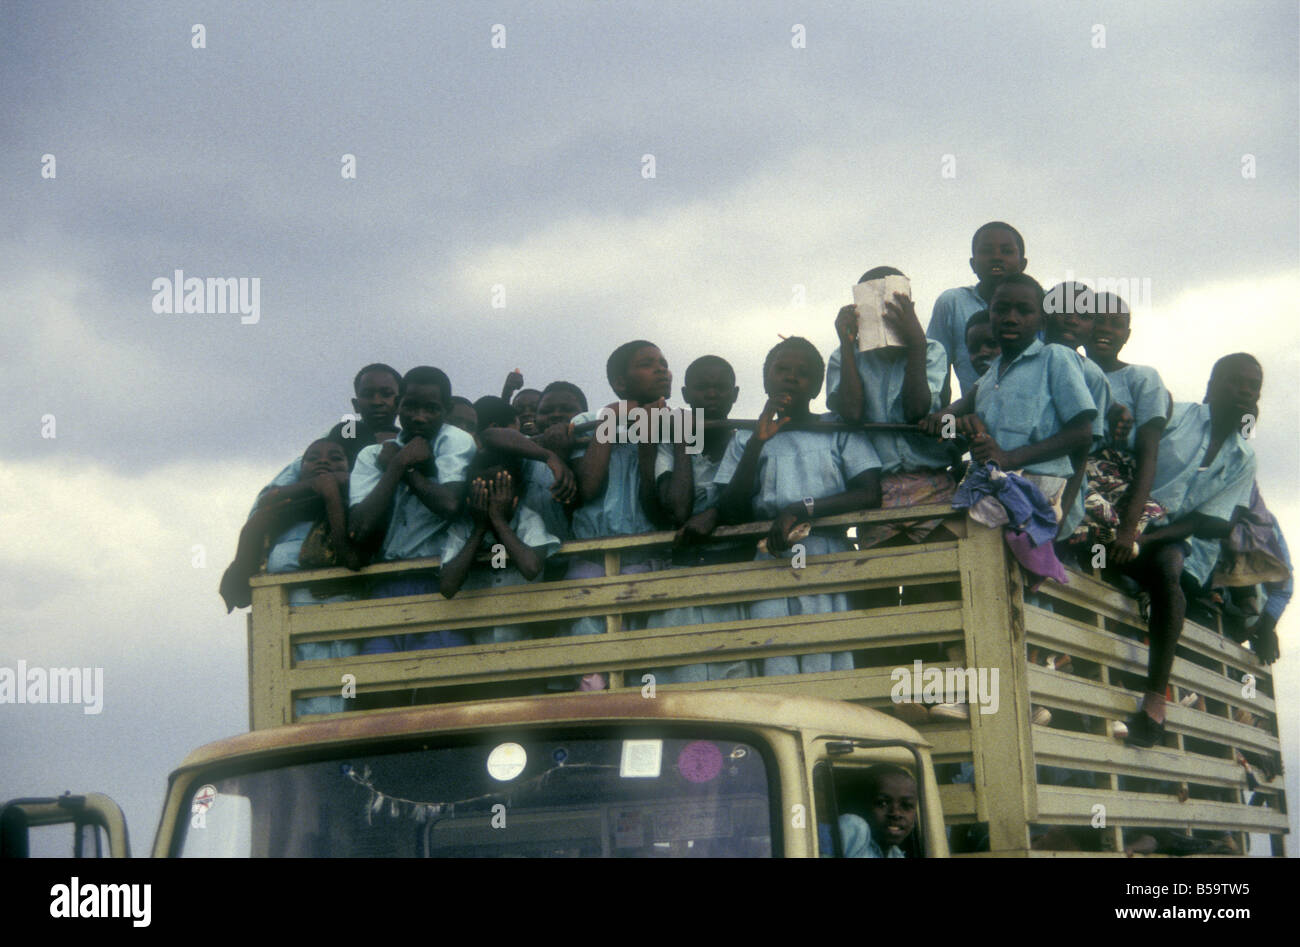 Group of happy excited school children in school uniform on a crowded lorry truck for a school outing trip Uganda Stock Photo